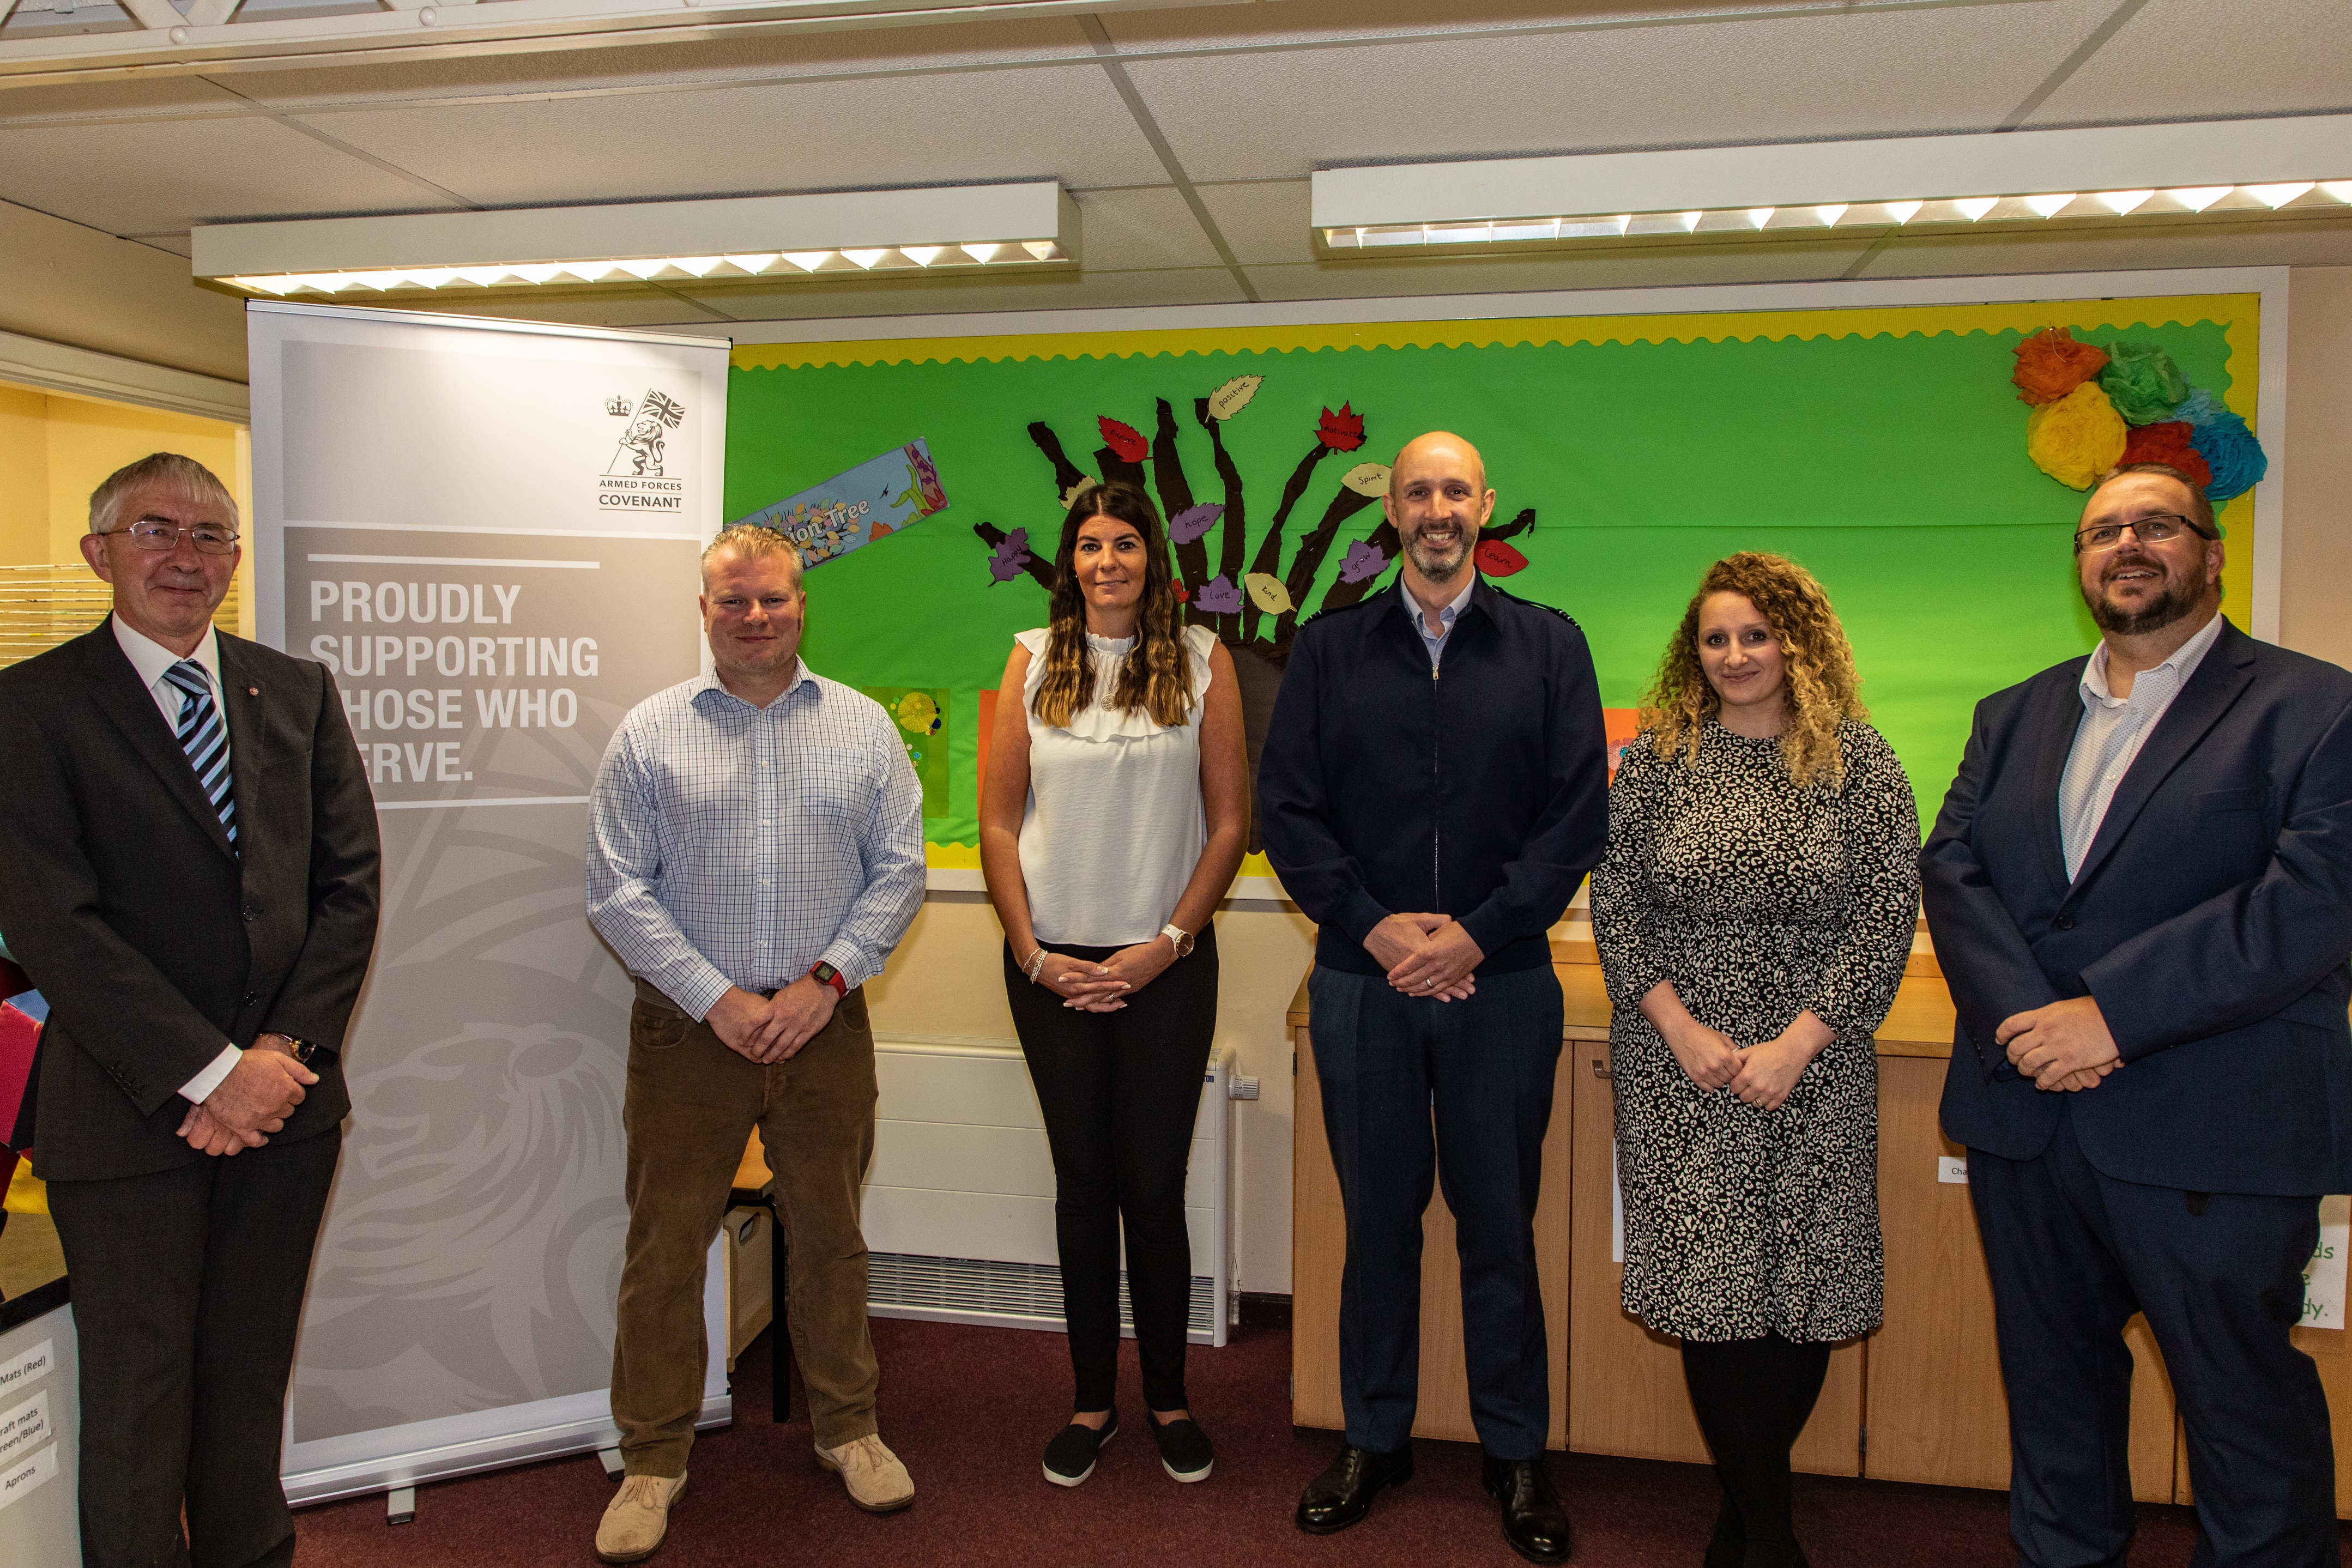 From left to right: Mark Davis MBE, Thomas Kelly, Jo Ward (Families’ Centre Co-Manager), Wing Commander Jez Case, Kate Ringham-Ward (Families’ Centre Co-Manager) and Rhys Thrower (Head Teacher Wittering Primary School)